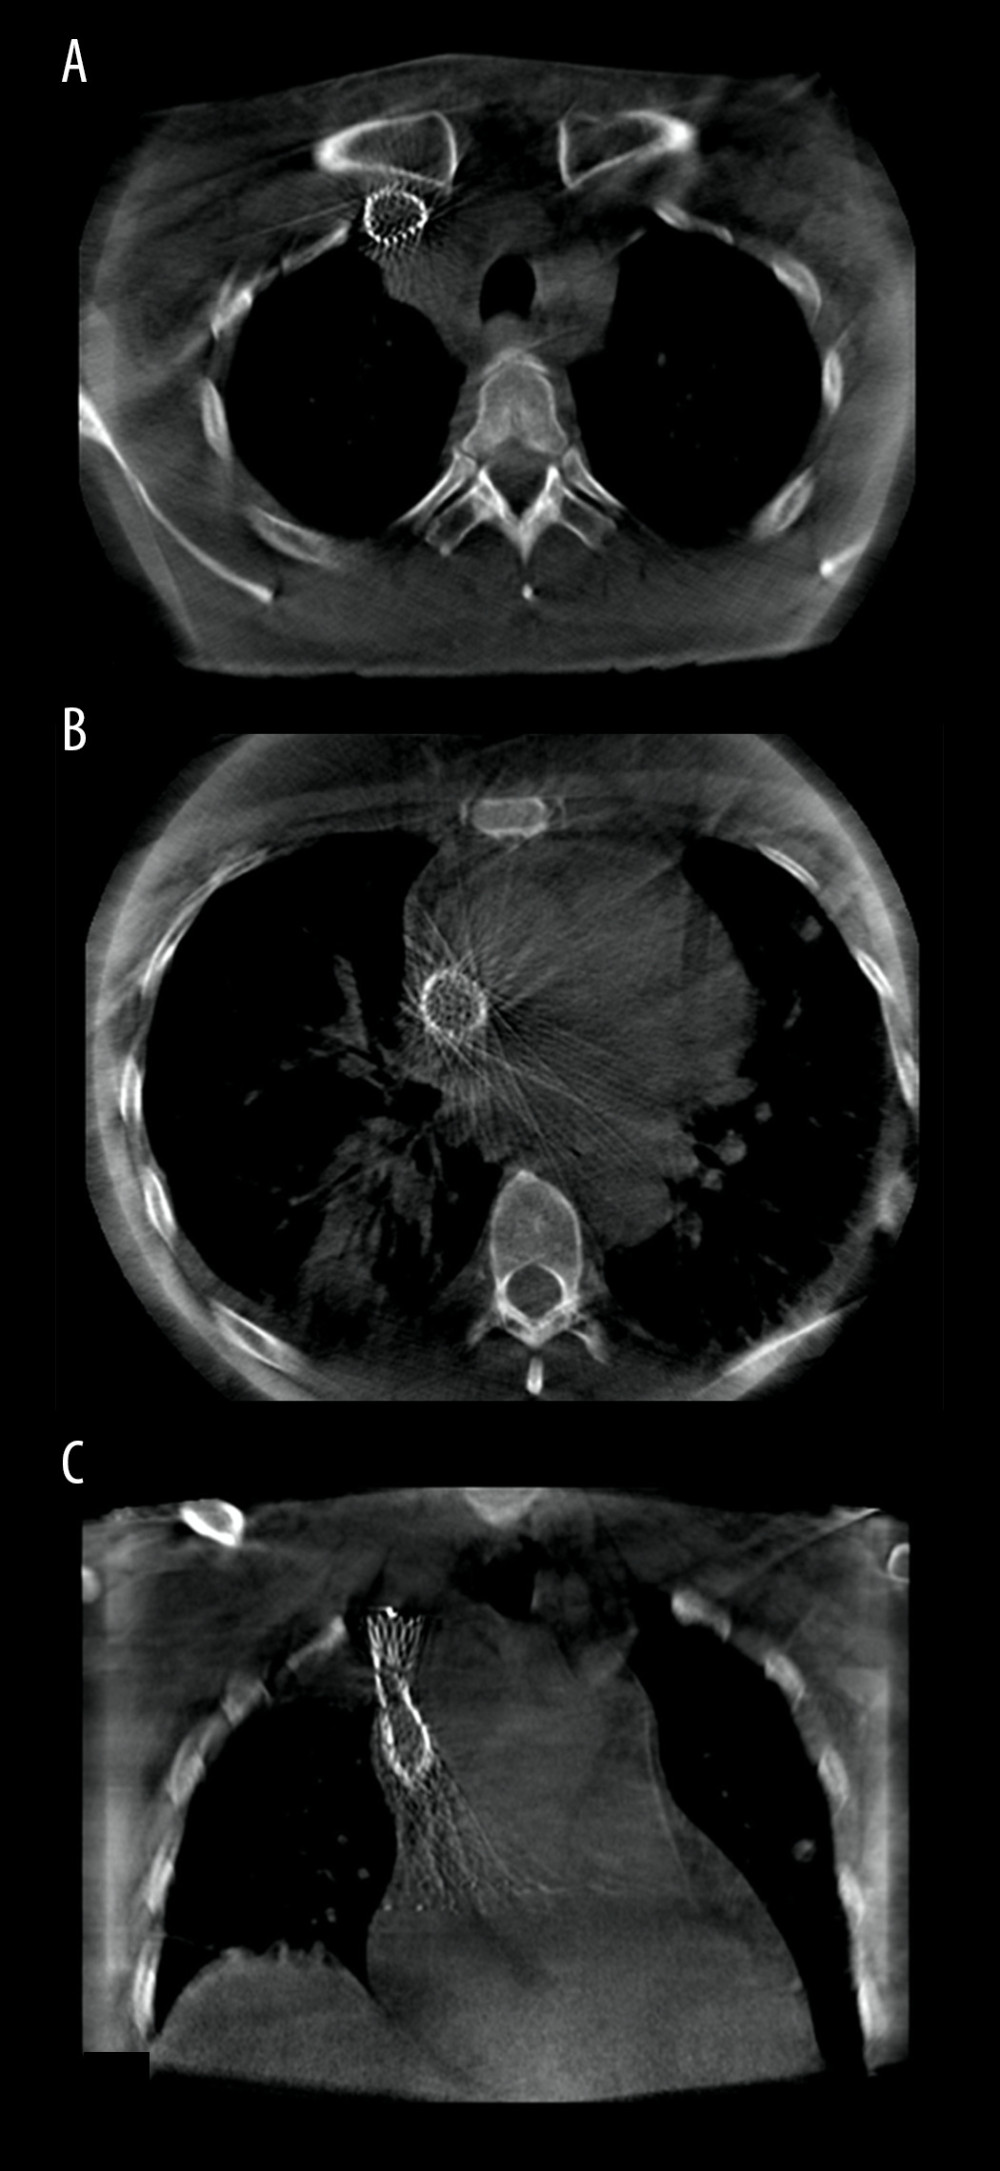 A–C were obtained from a 43-year-old woman with superior vena cava syndrome. Cone beam computed tomography images demonstrating the position of the superior vena cava stent deployed, with no immediate complications.